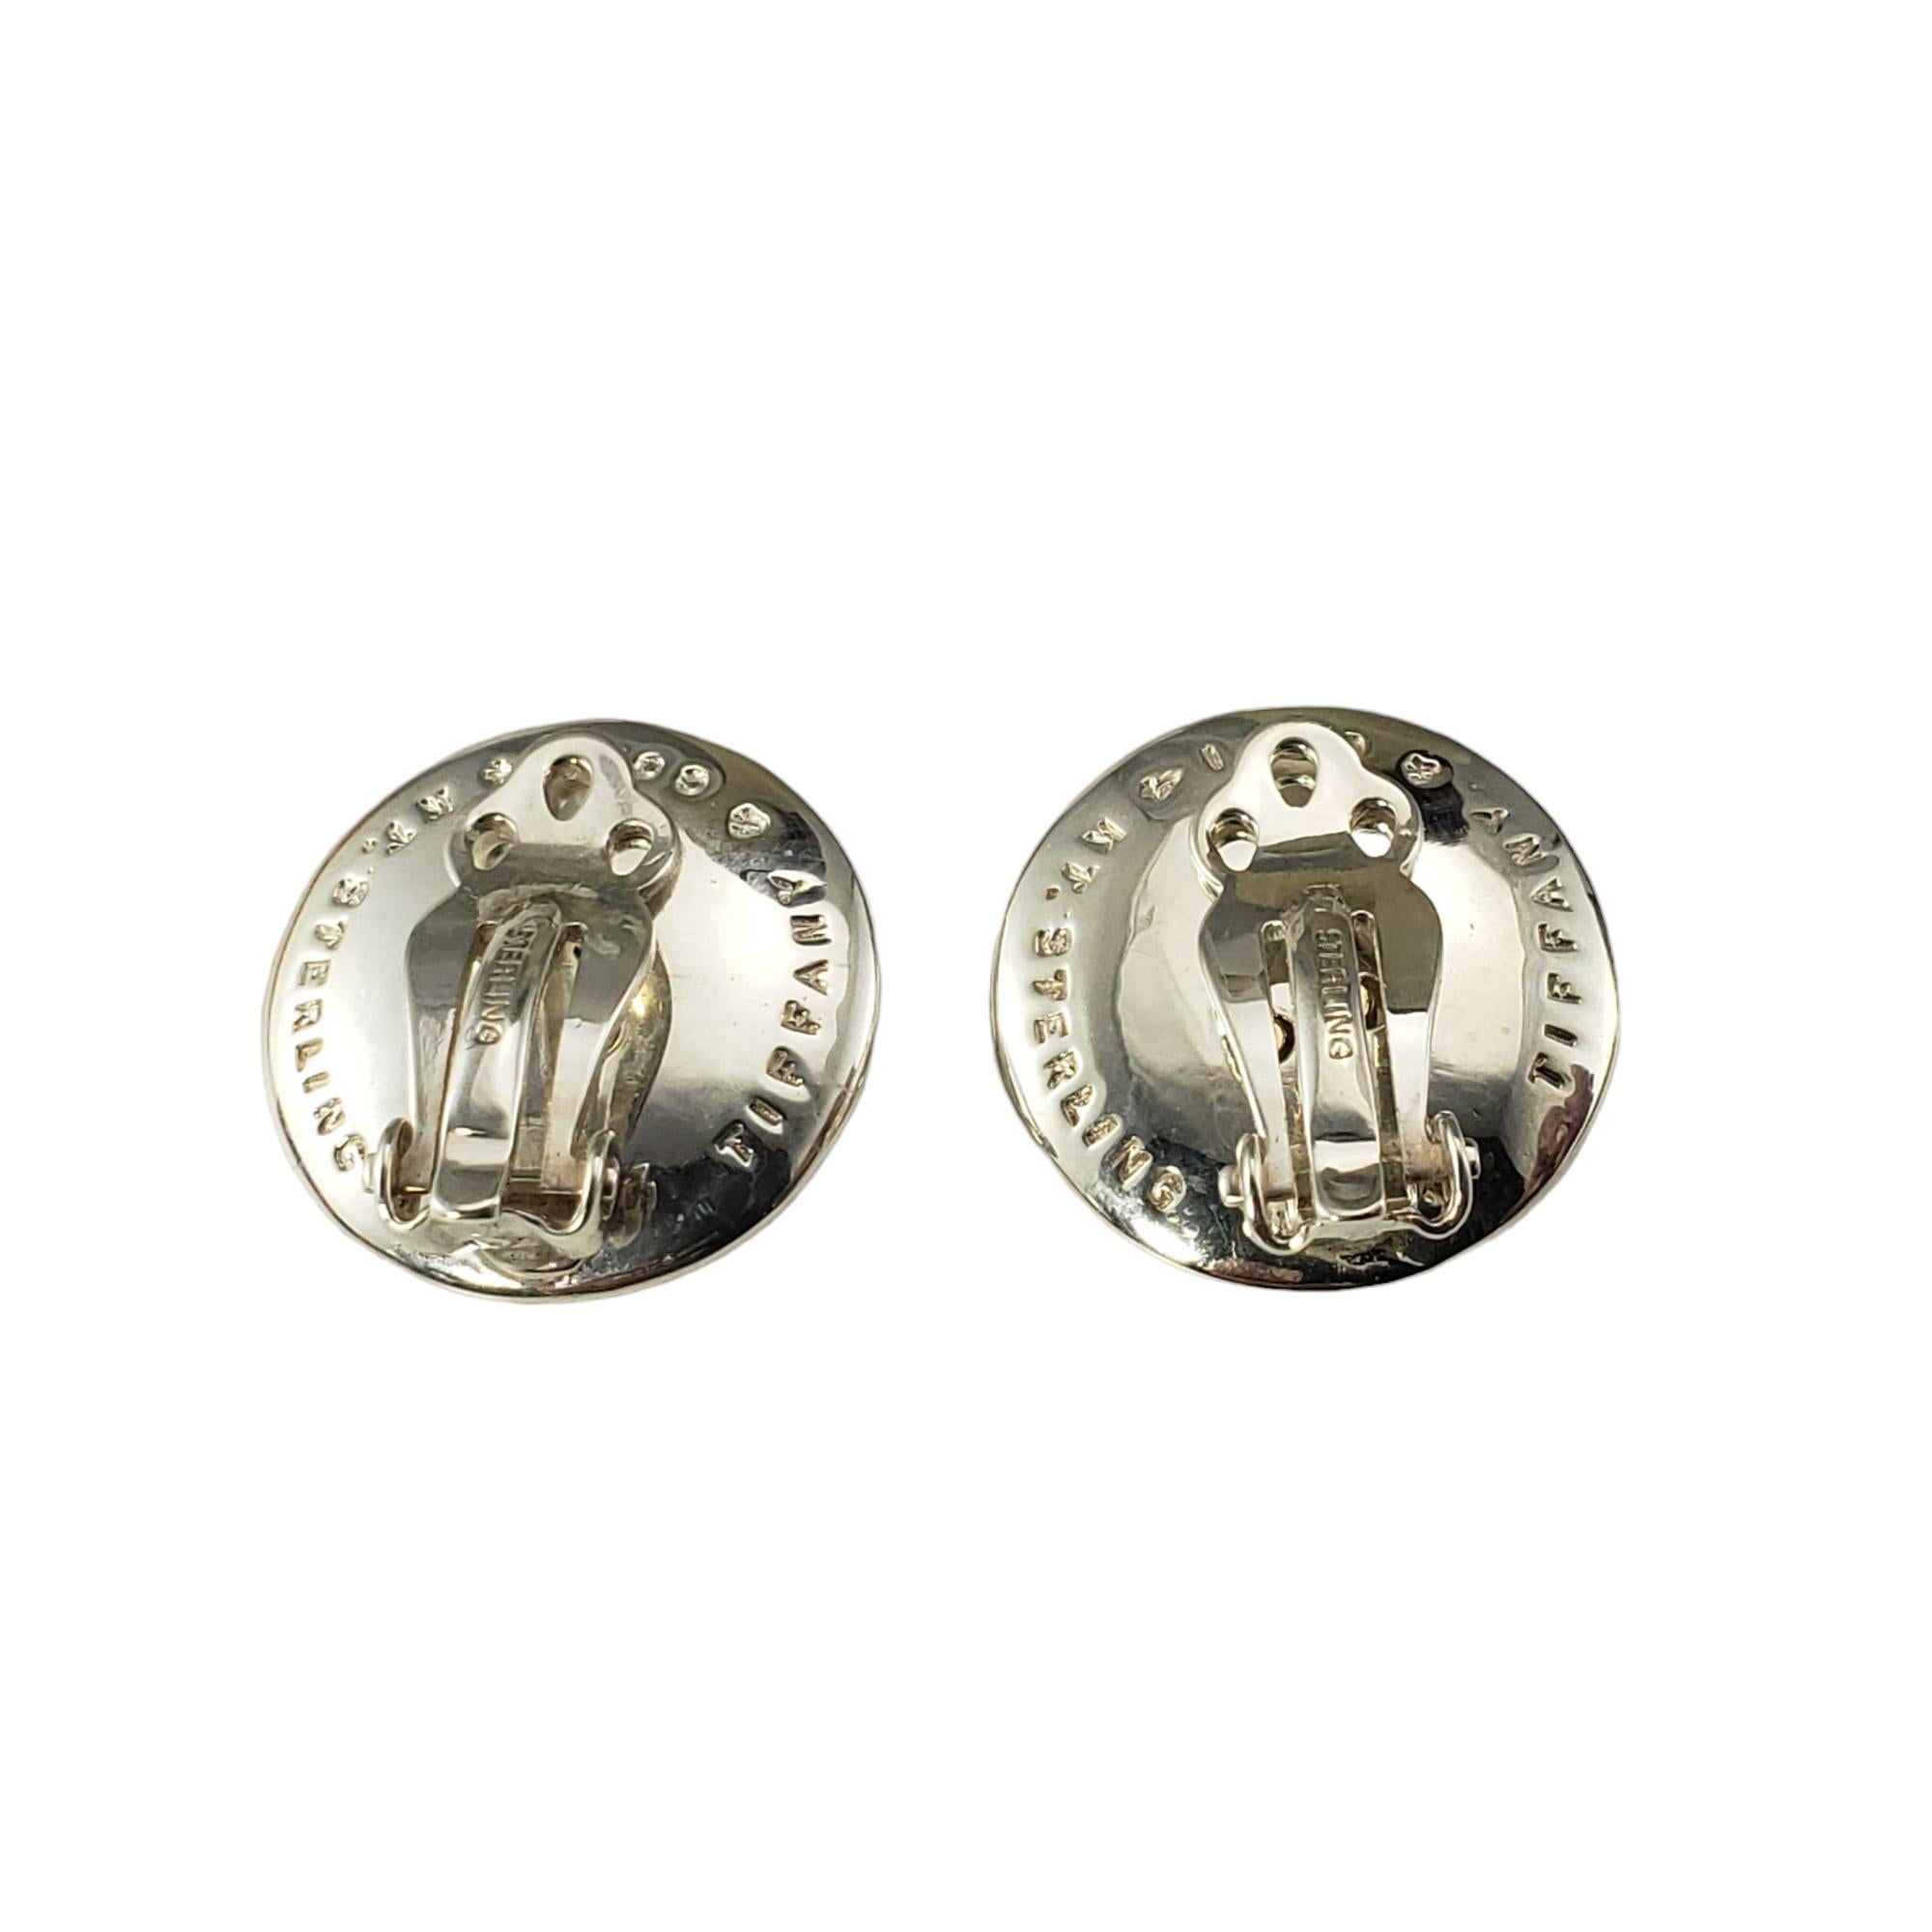 Vintage Tiffany & Co. Sterling Silver Button Clip On Earrings #17294 For Sale 1